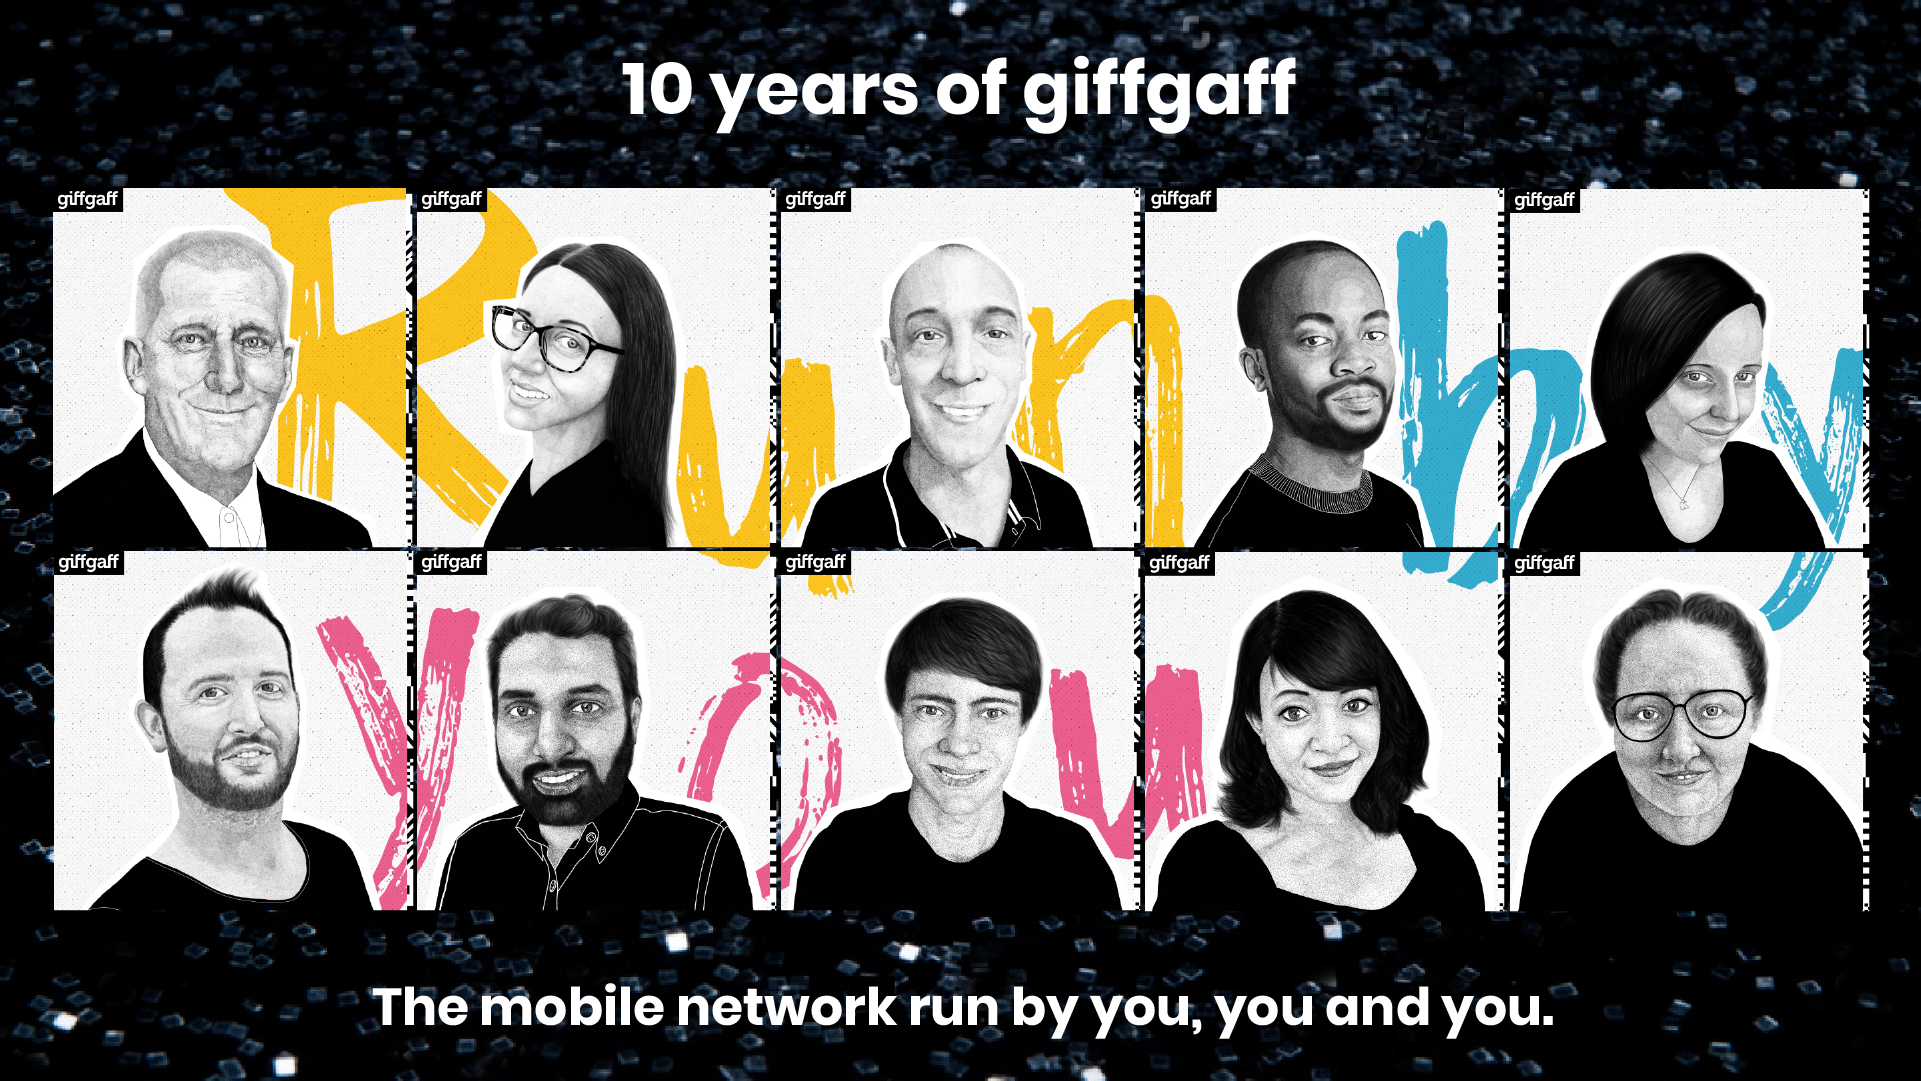 GiffGaff-top team-member-users-run-by-you